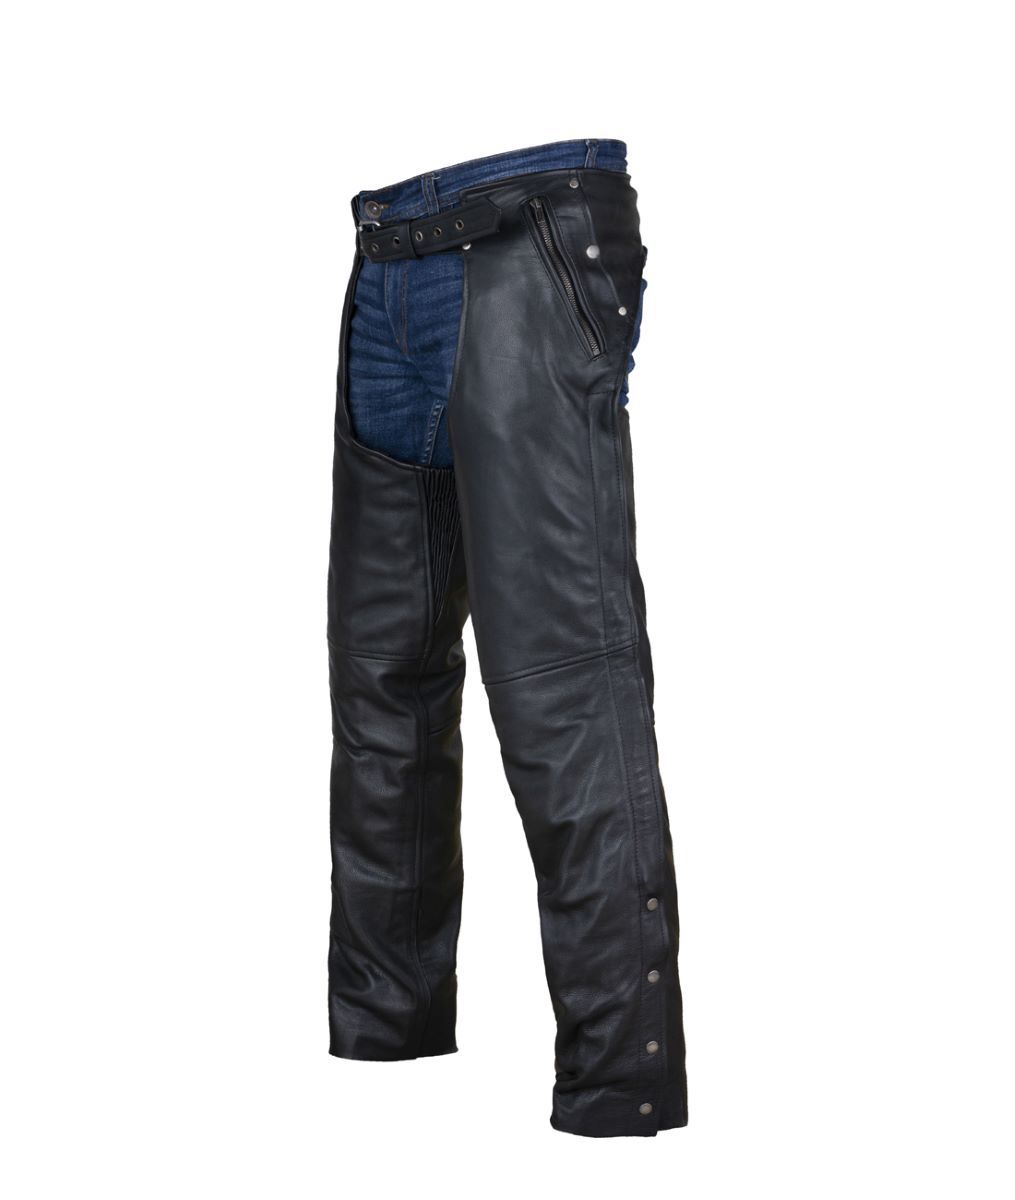 Black Multi-Pocket Naked Cowhide Leather Chaps With Zipout liner